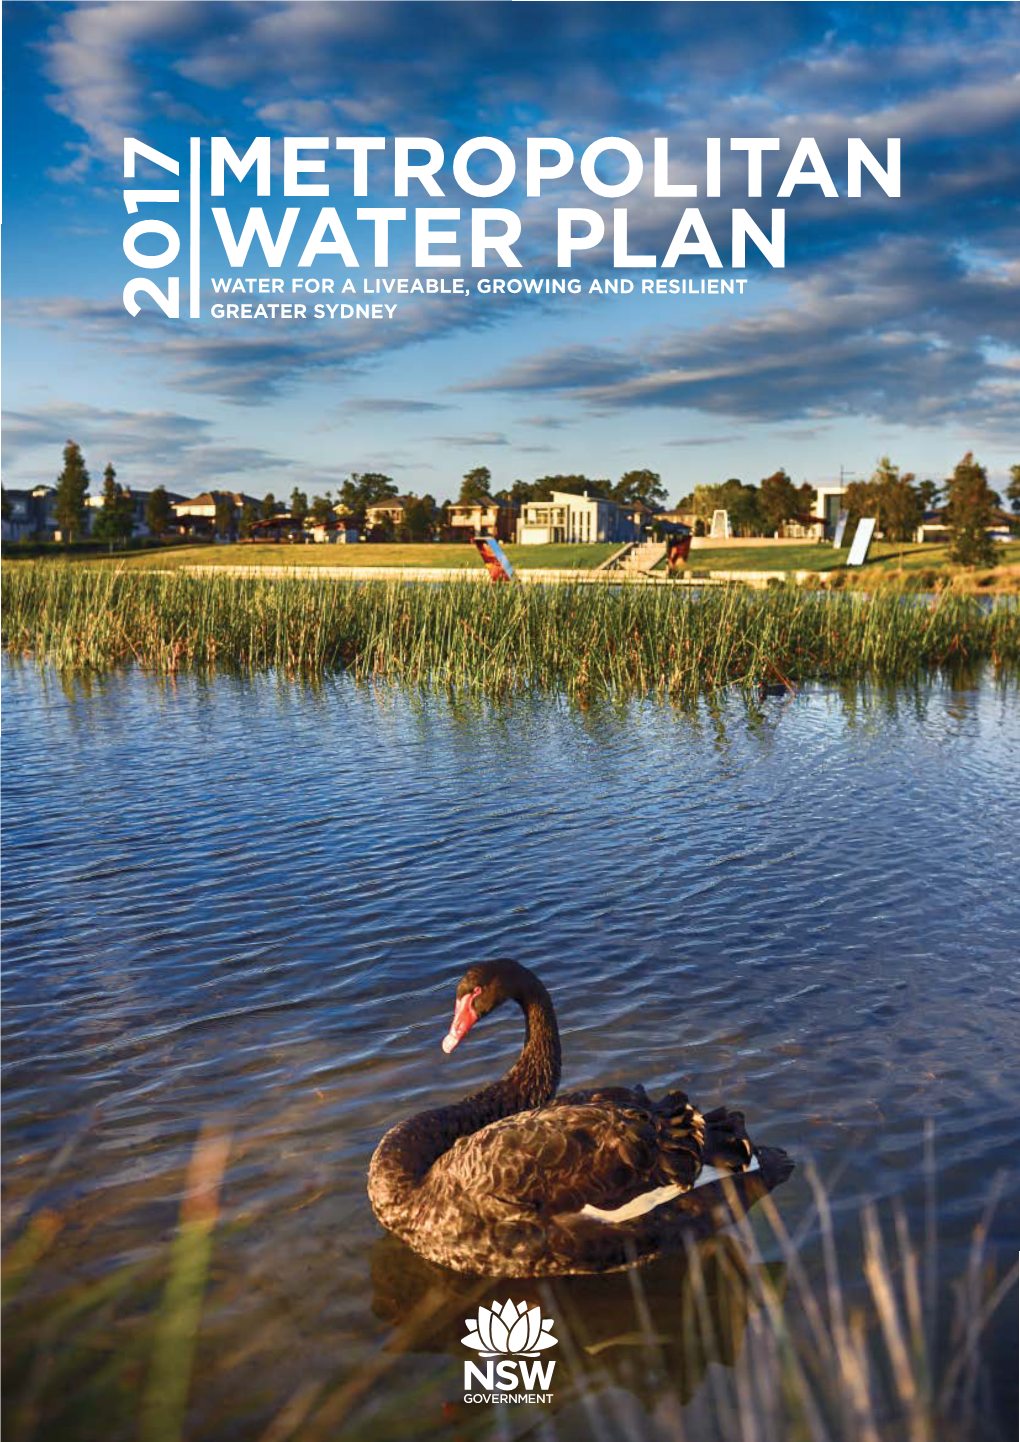 Metropolitan Water Plan Water for a Liveable, Growing and Resilient Greater Sydney